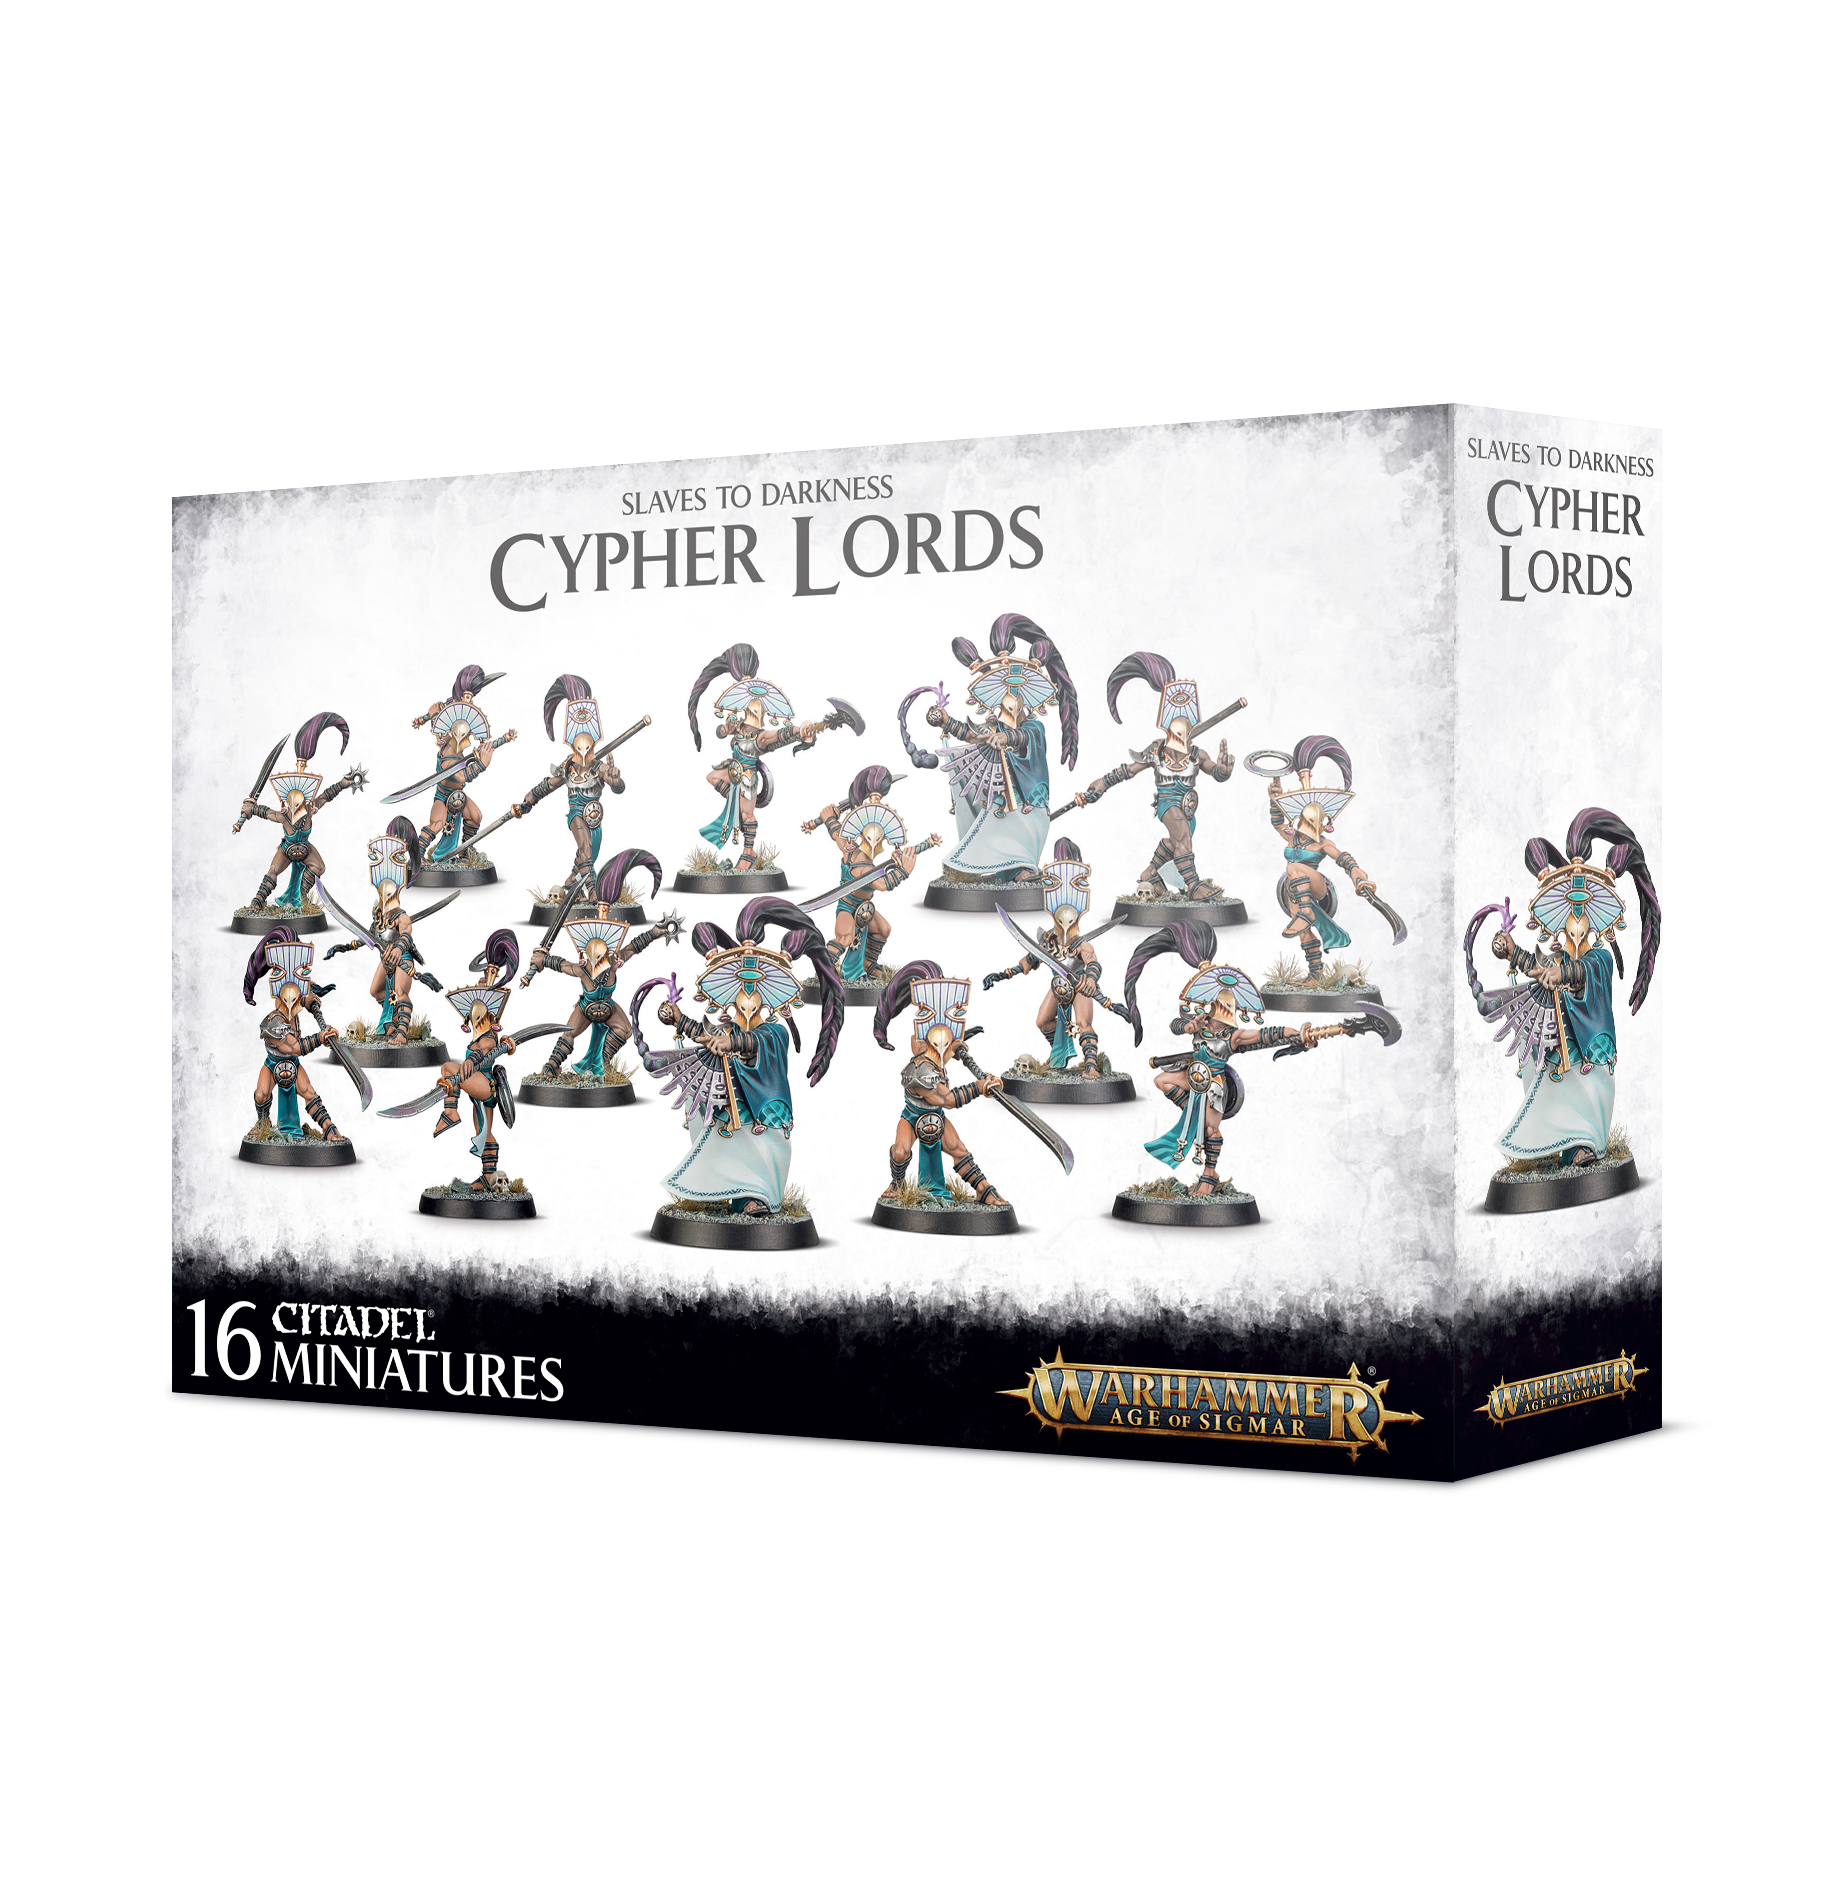 Cypher Lords - 83-31 - Slaves to Darkness - Warhammer Age of Sigmar